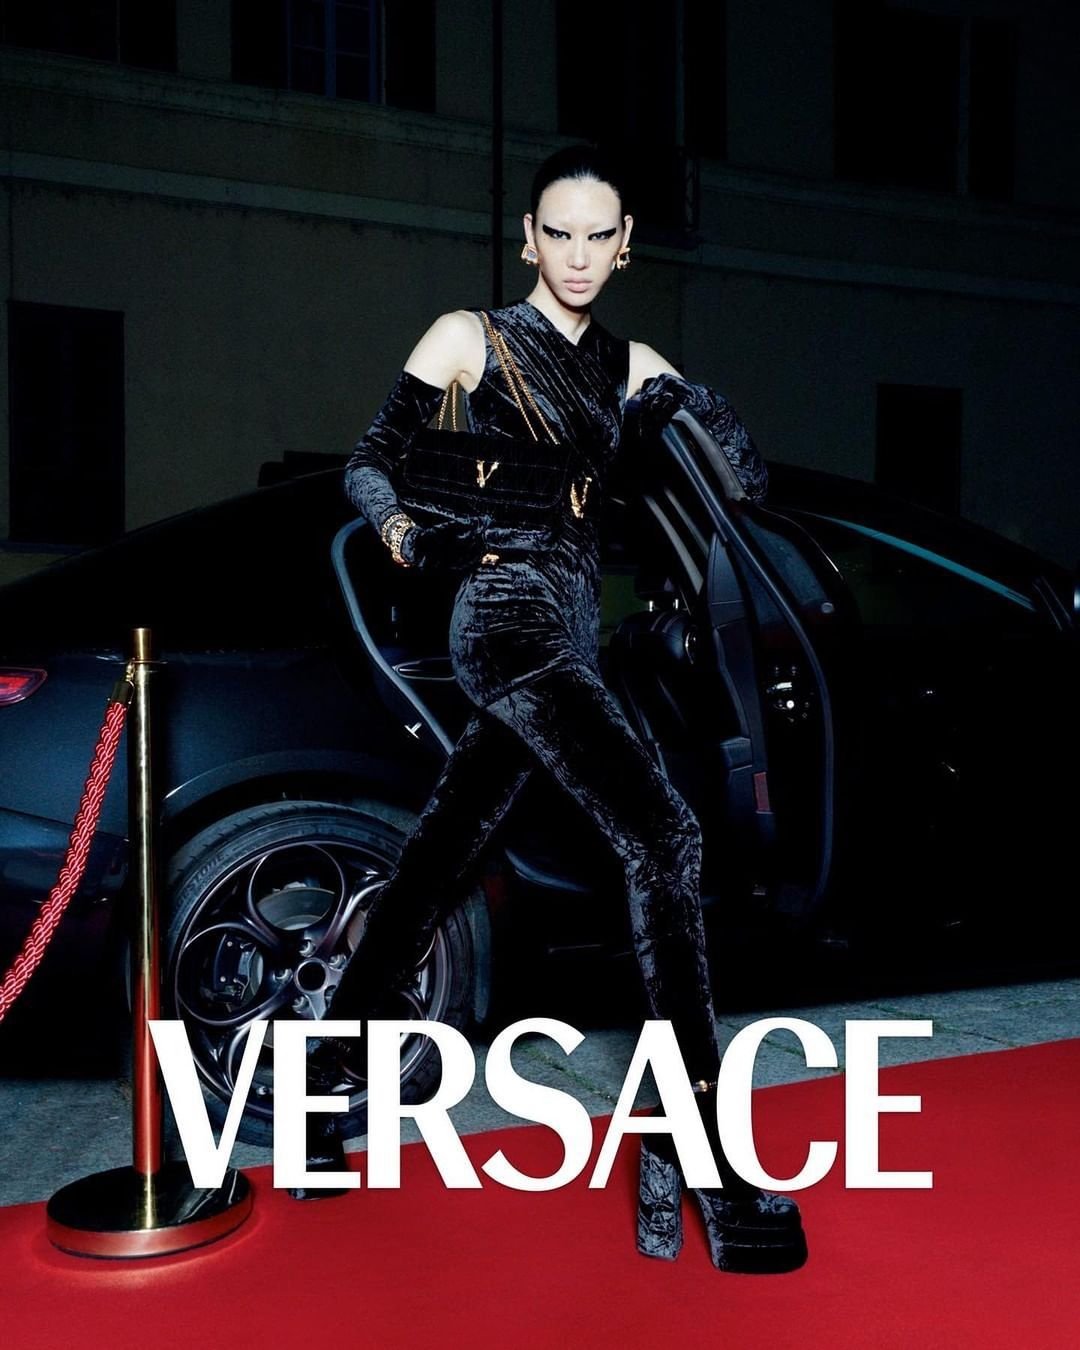 Versace  Fashionably Late with the 2022 Holiday Campaign